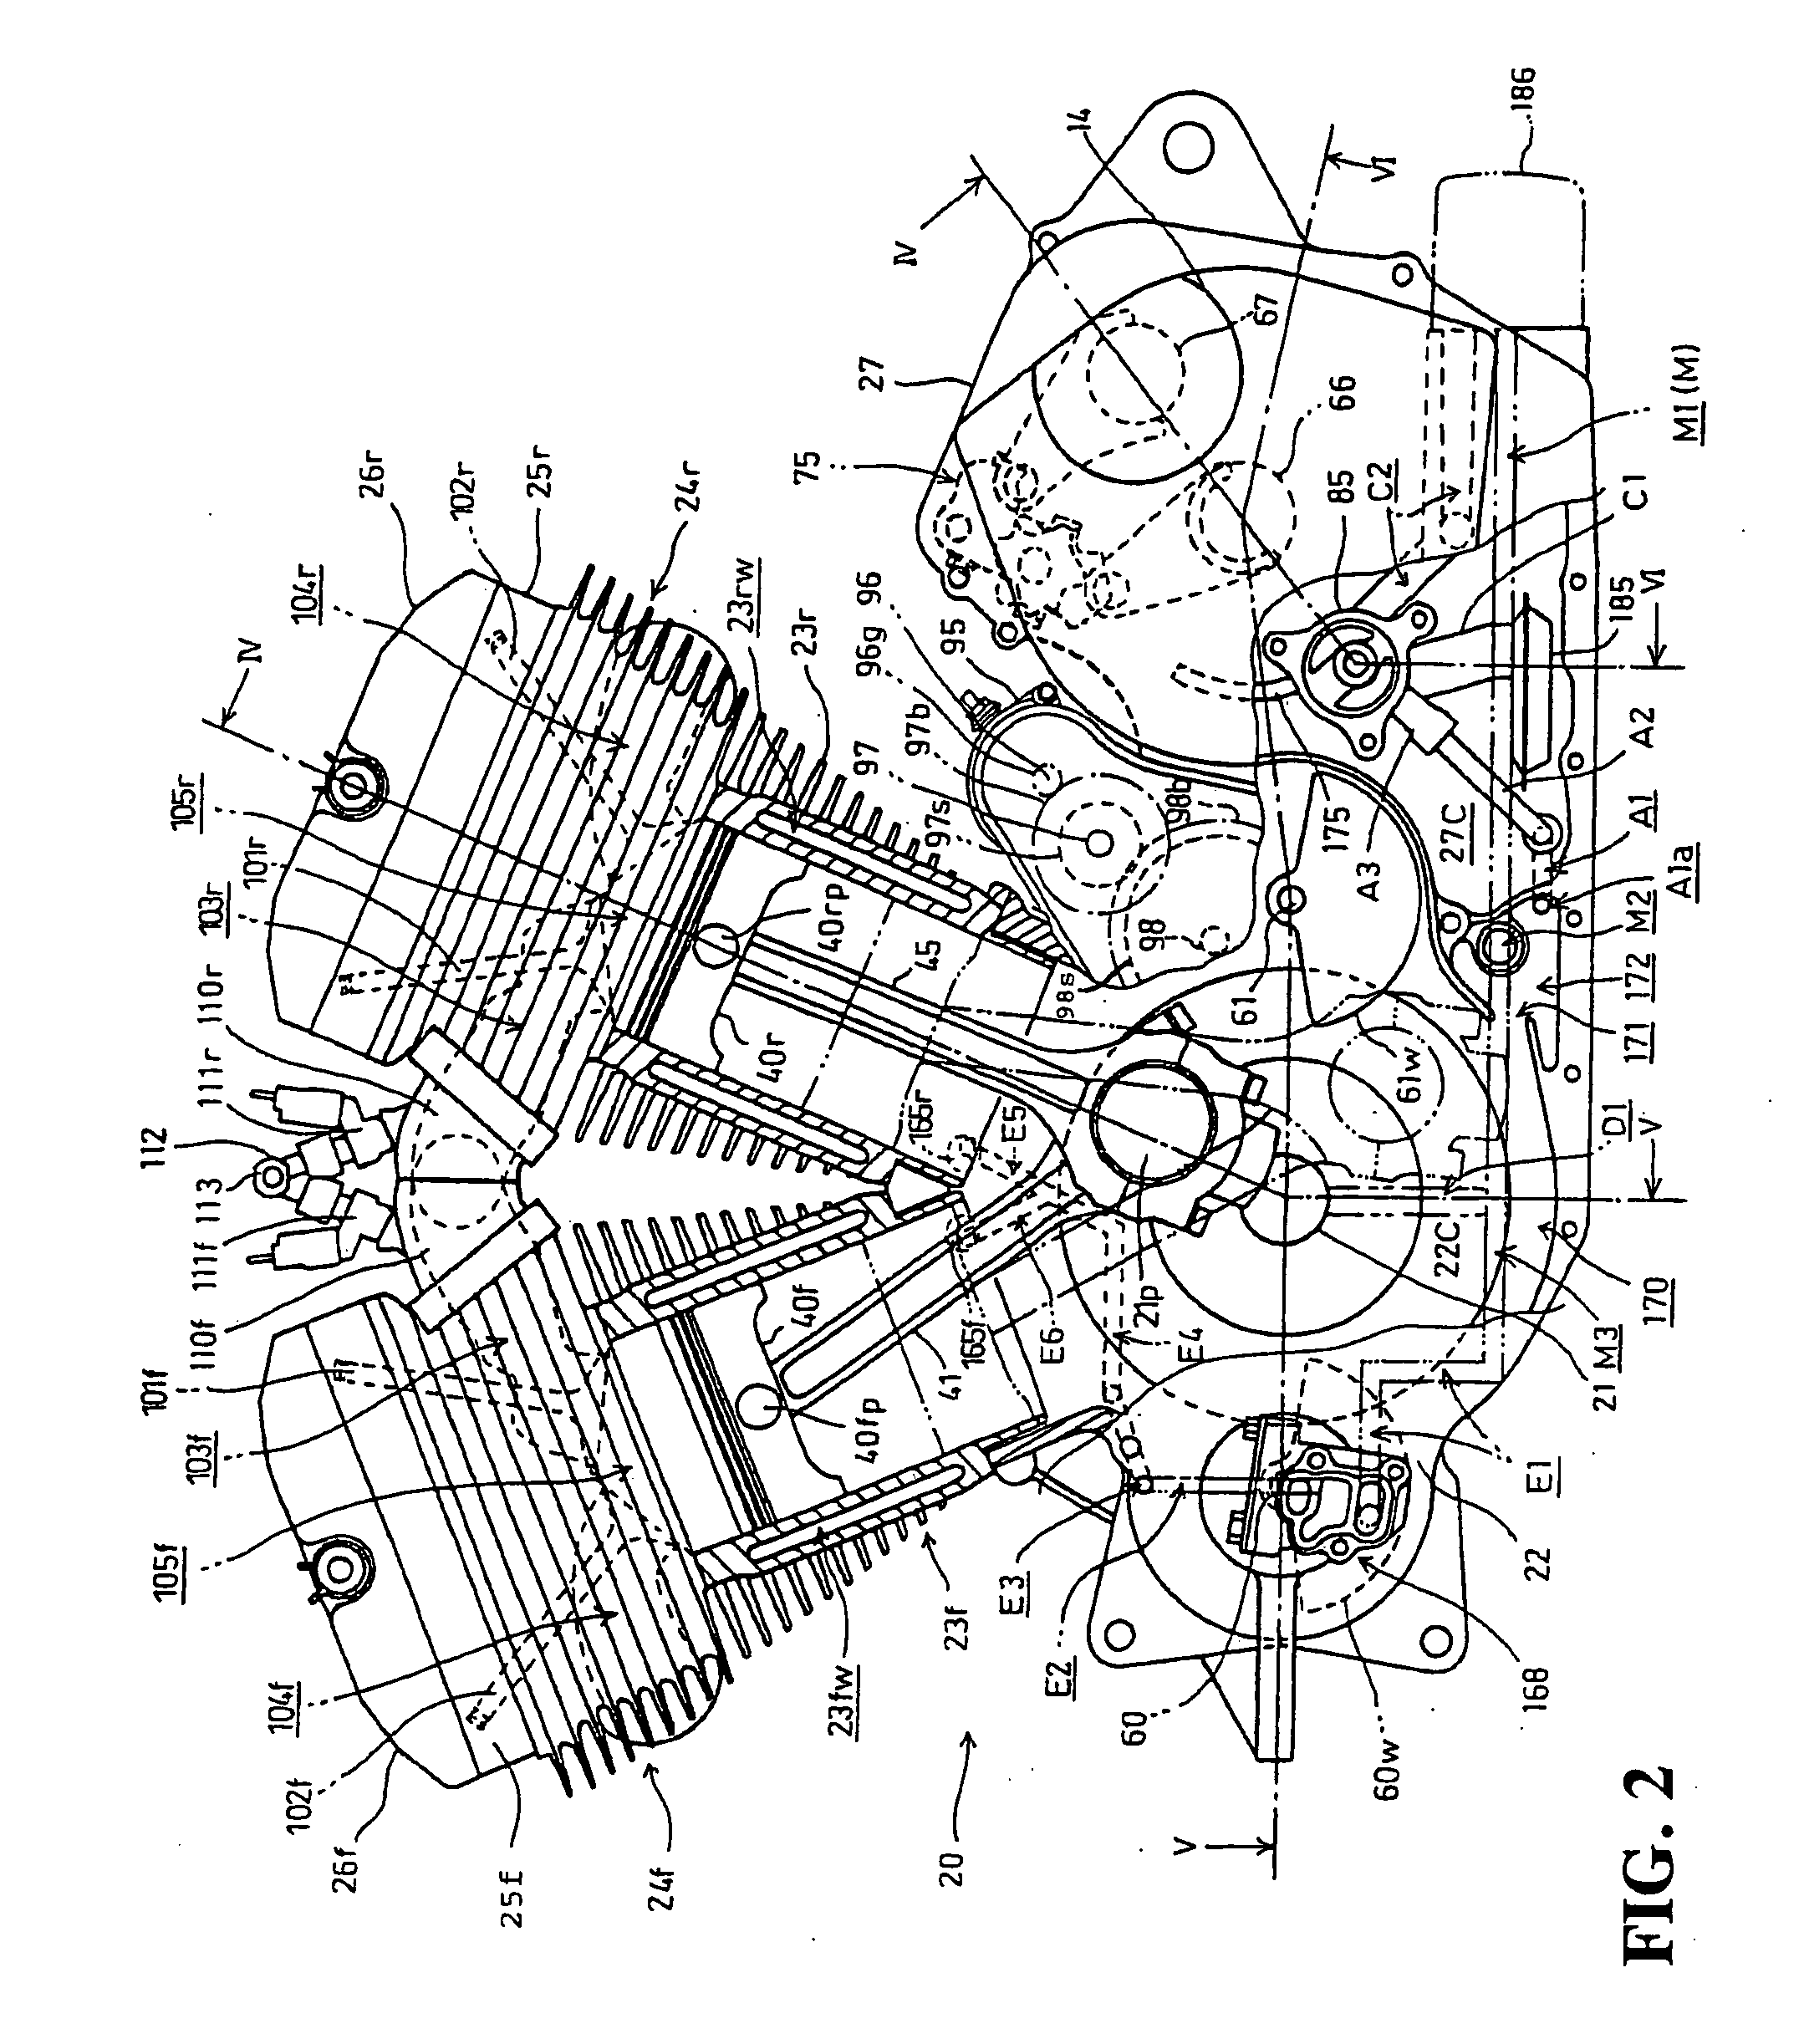 Layout structure of hydraulic control valve for valve train in internal combustion engine